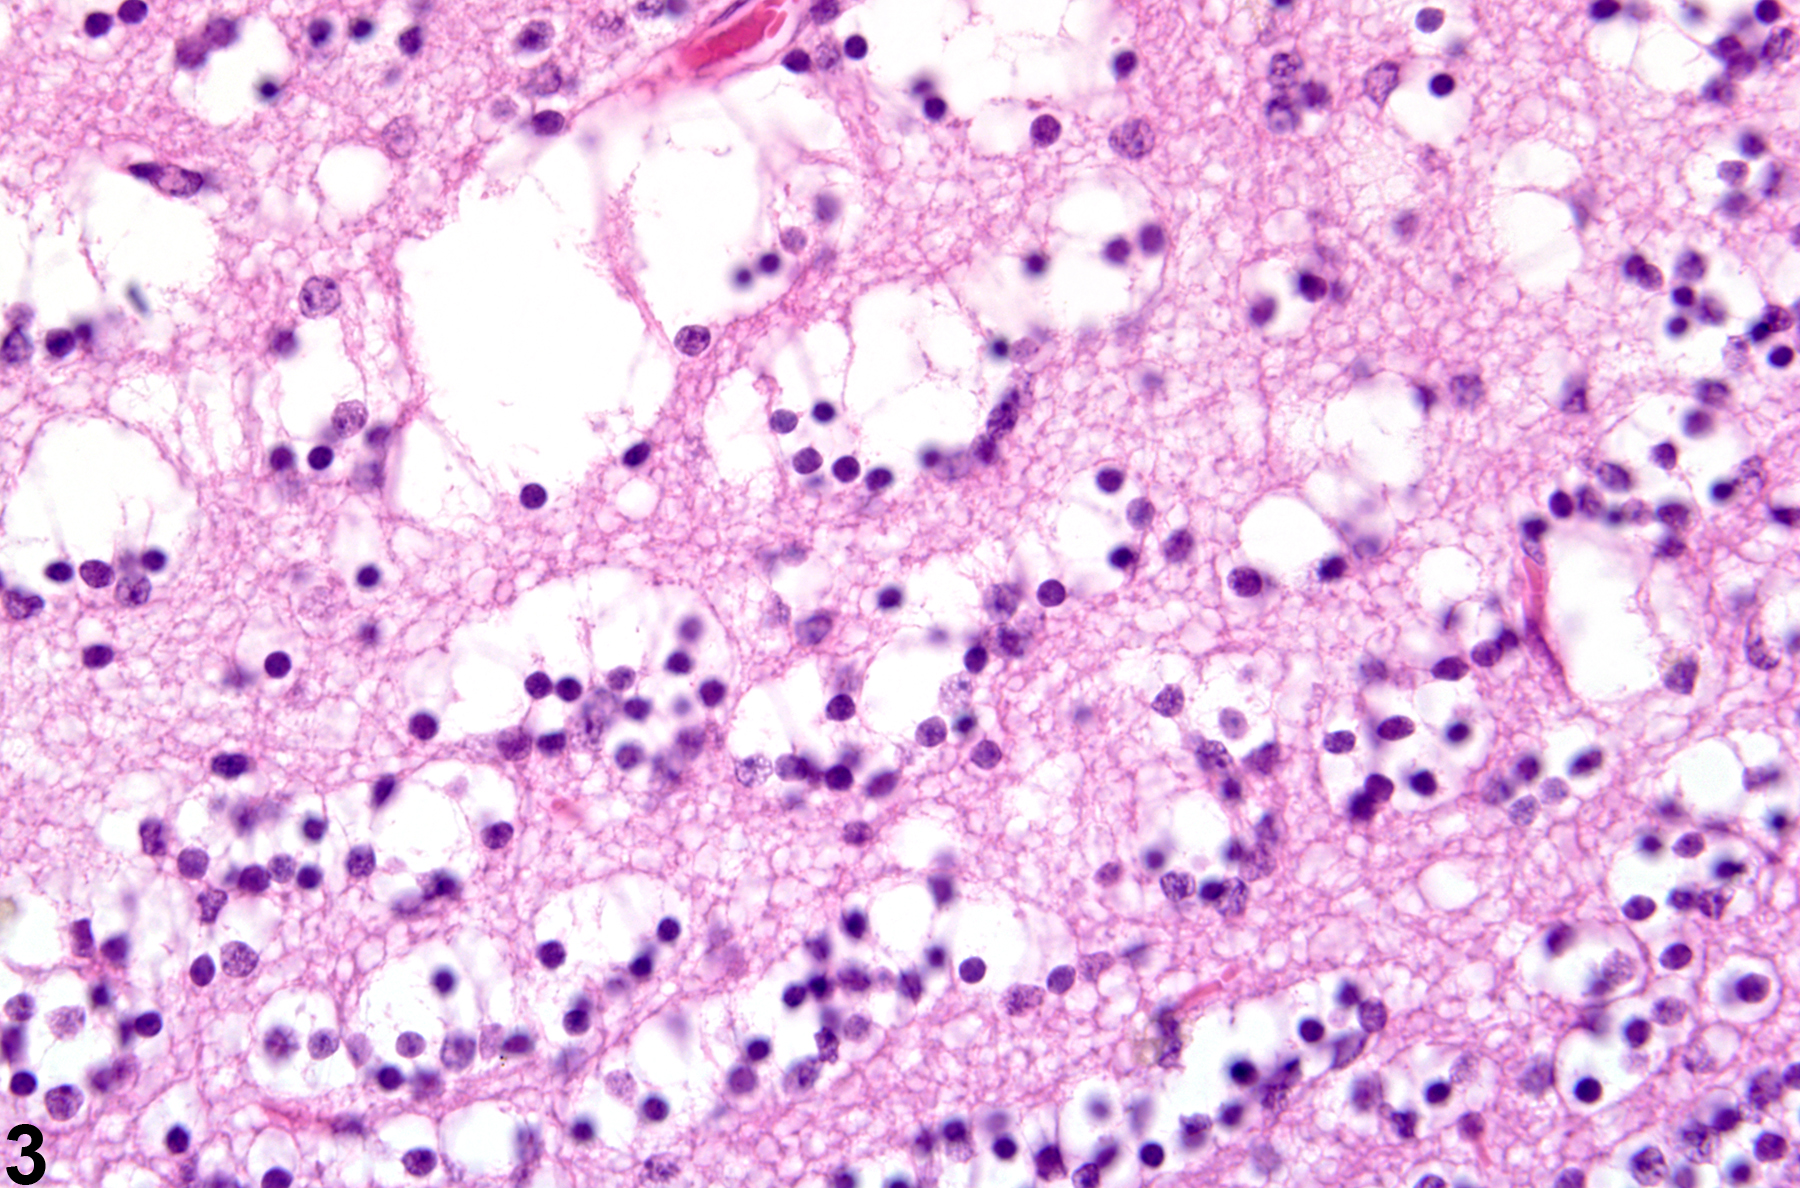 Image of degeneration in the brain from a female B6C3F1 mouse in a chronic study